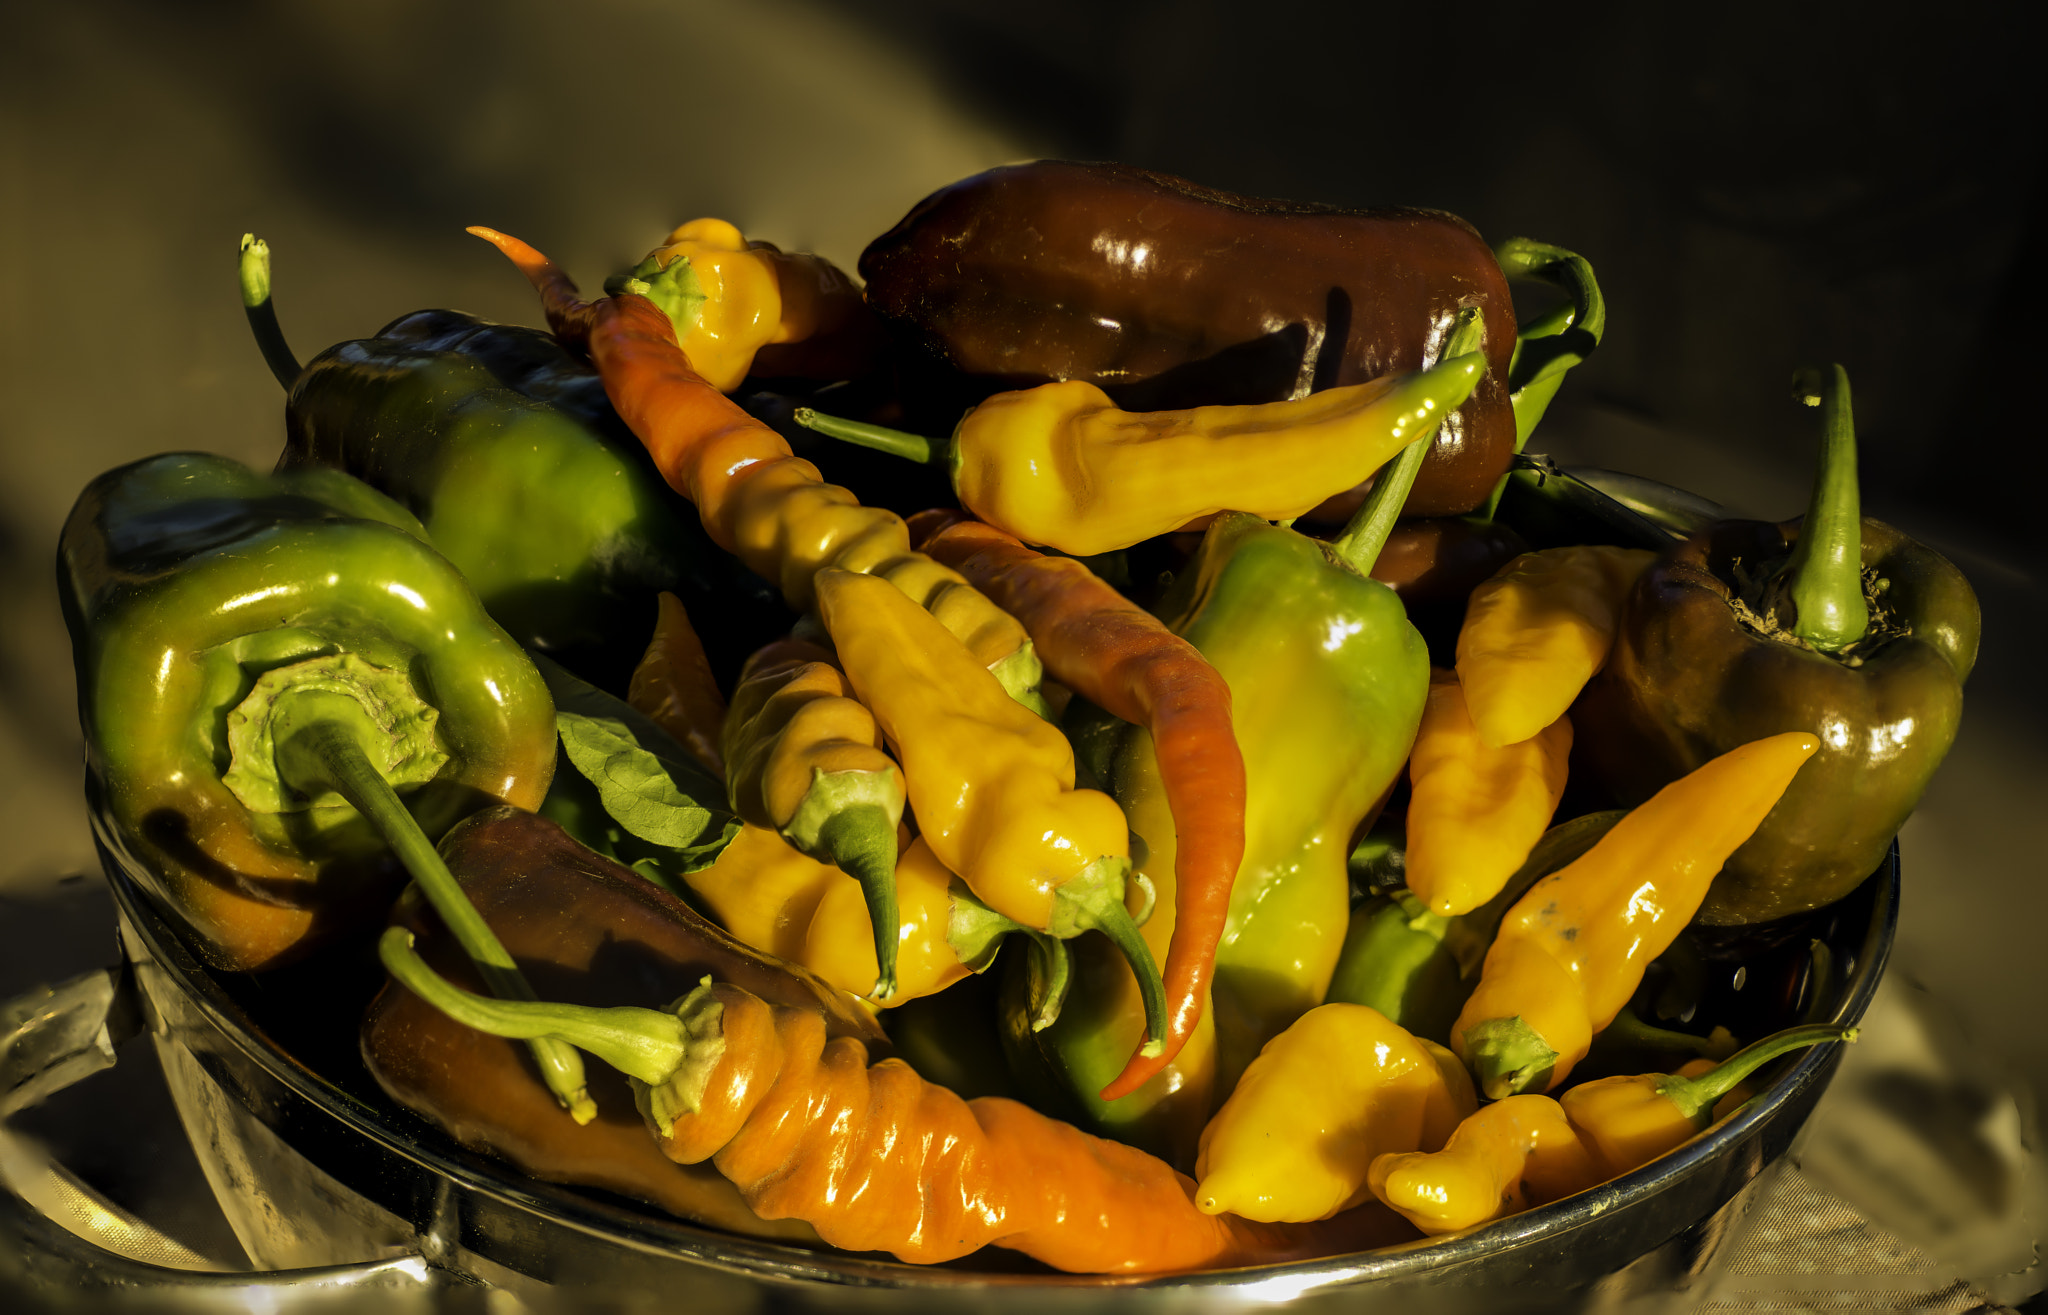 Nikon D800 + AF Micro-Nikkor 60mm f/2.8 sample photo. Chili peppers from my garden photography